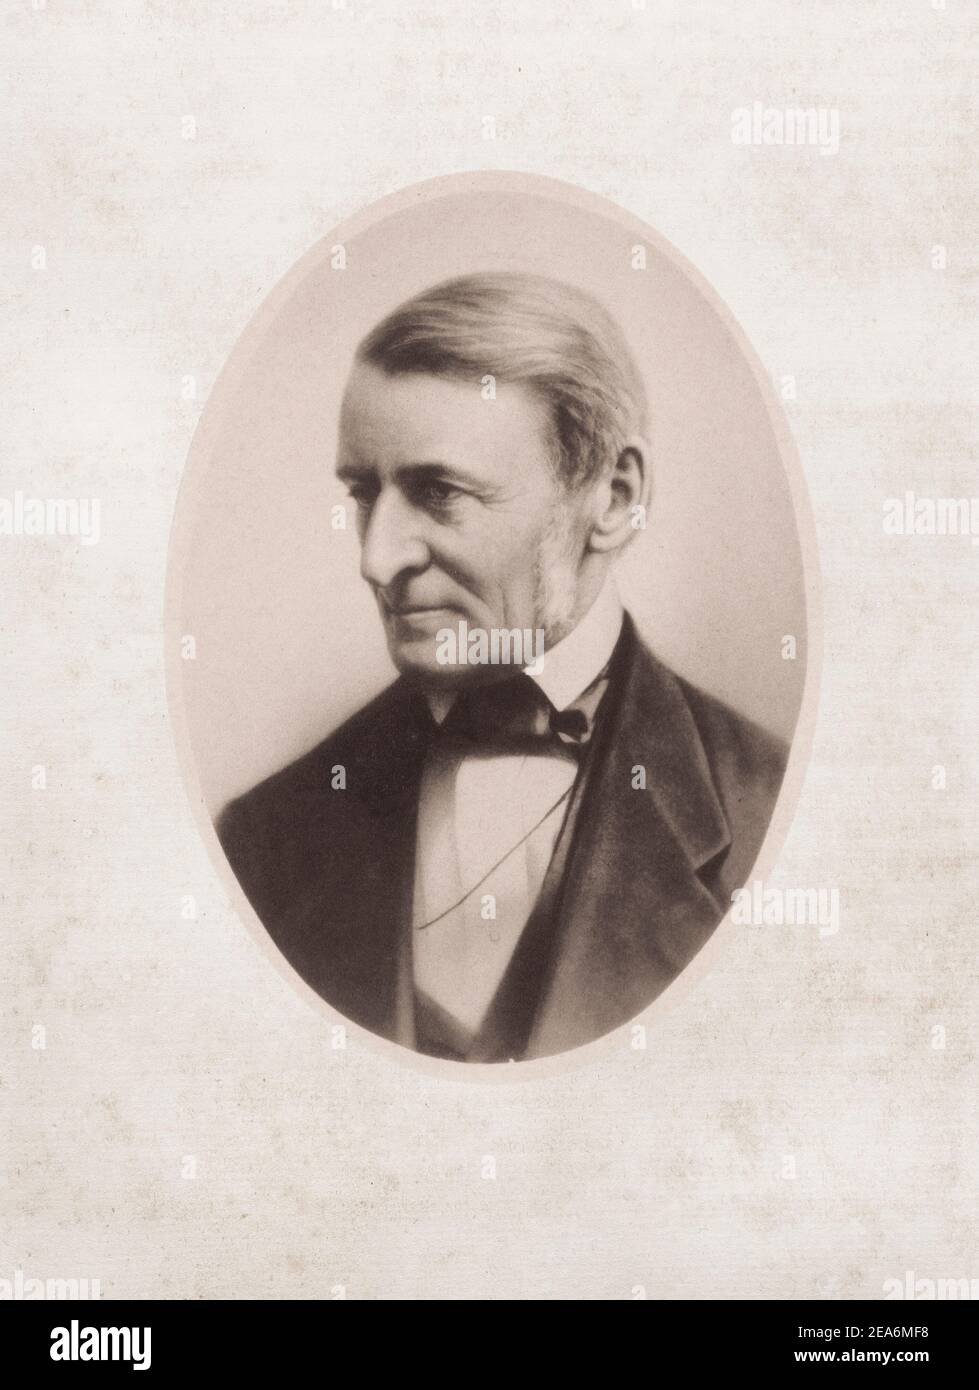 Ralph Waldo Emerson (1803 – 1882), who went by his middle name Waldo, was an American essayist, lecturer, philosopher, and poet who led the transcende Stock Photo